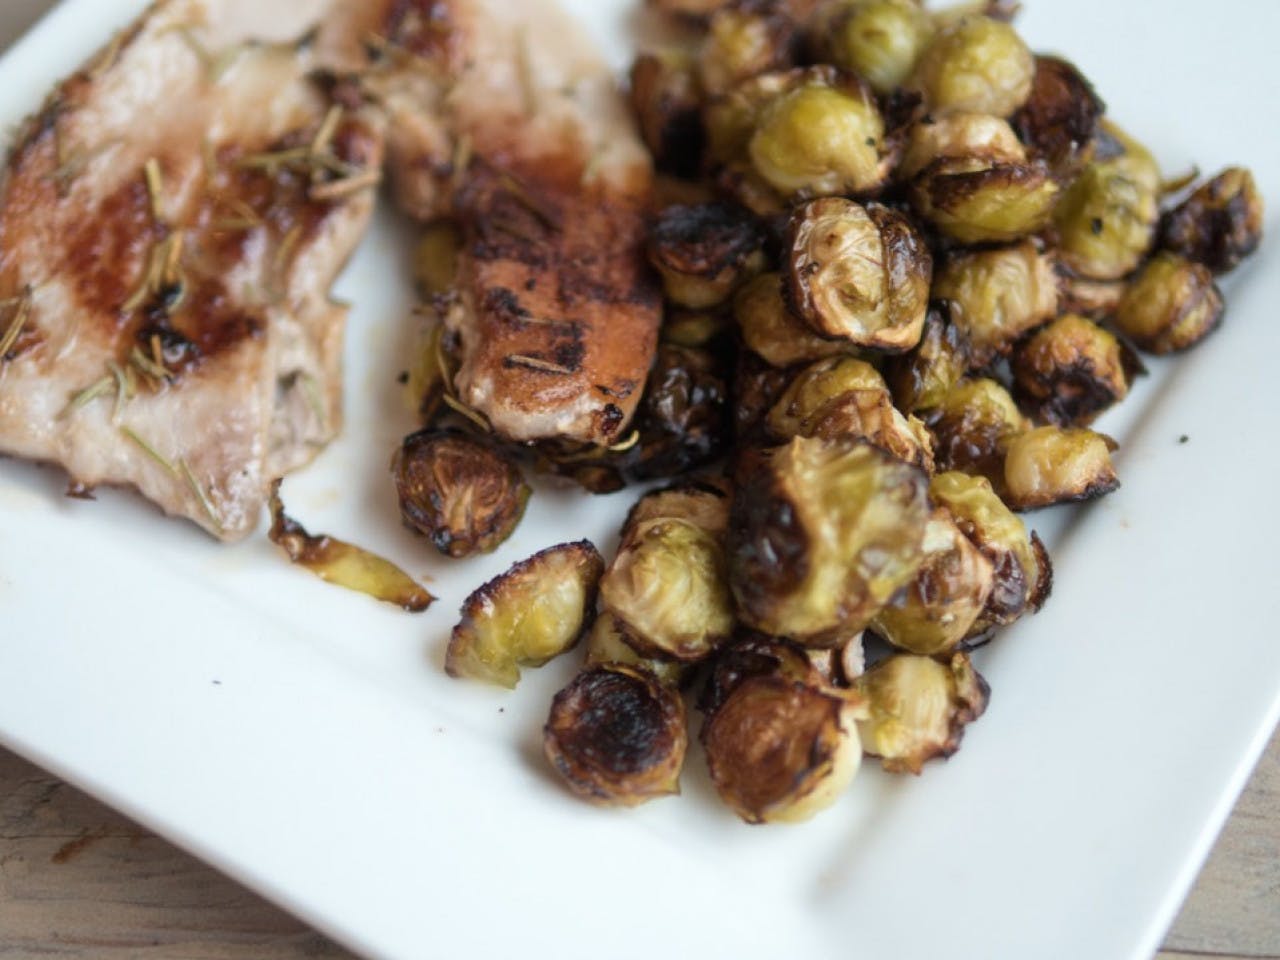 Brussels sprouts with bacon